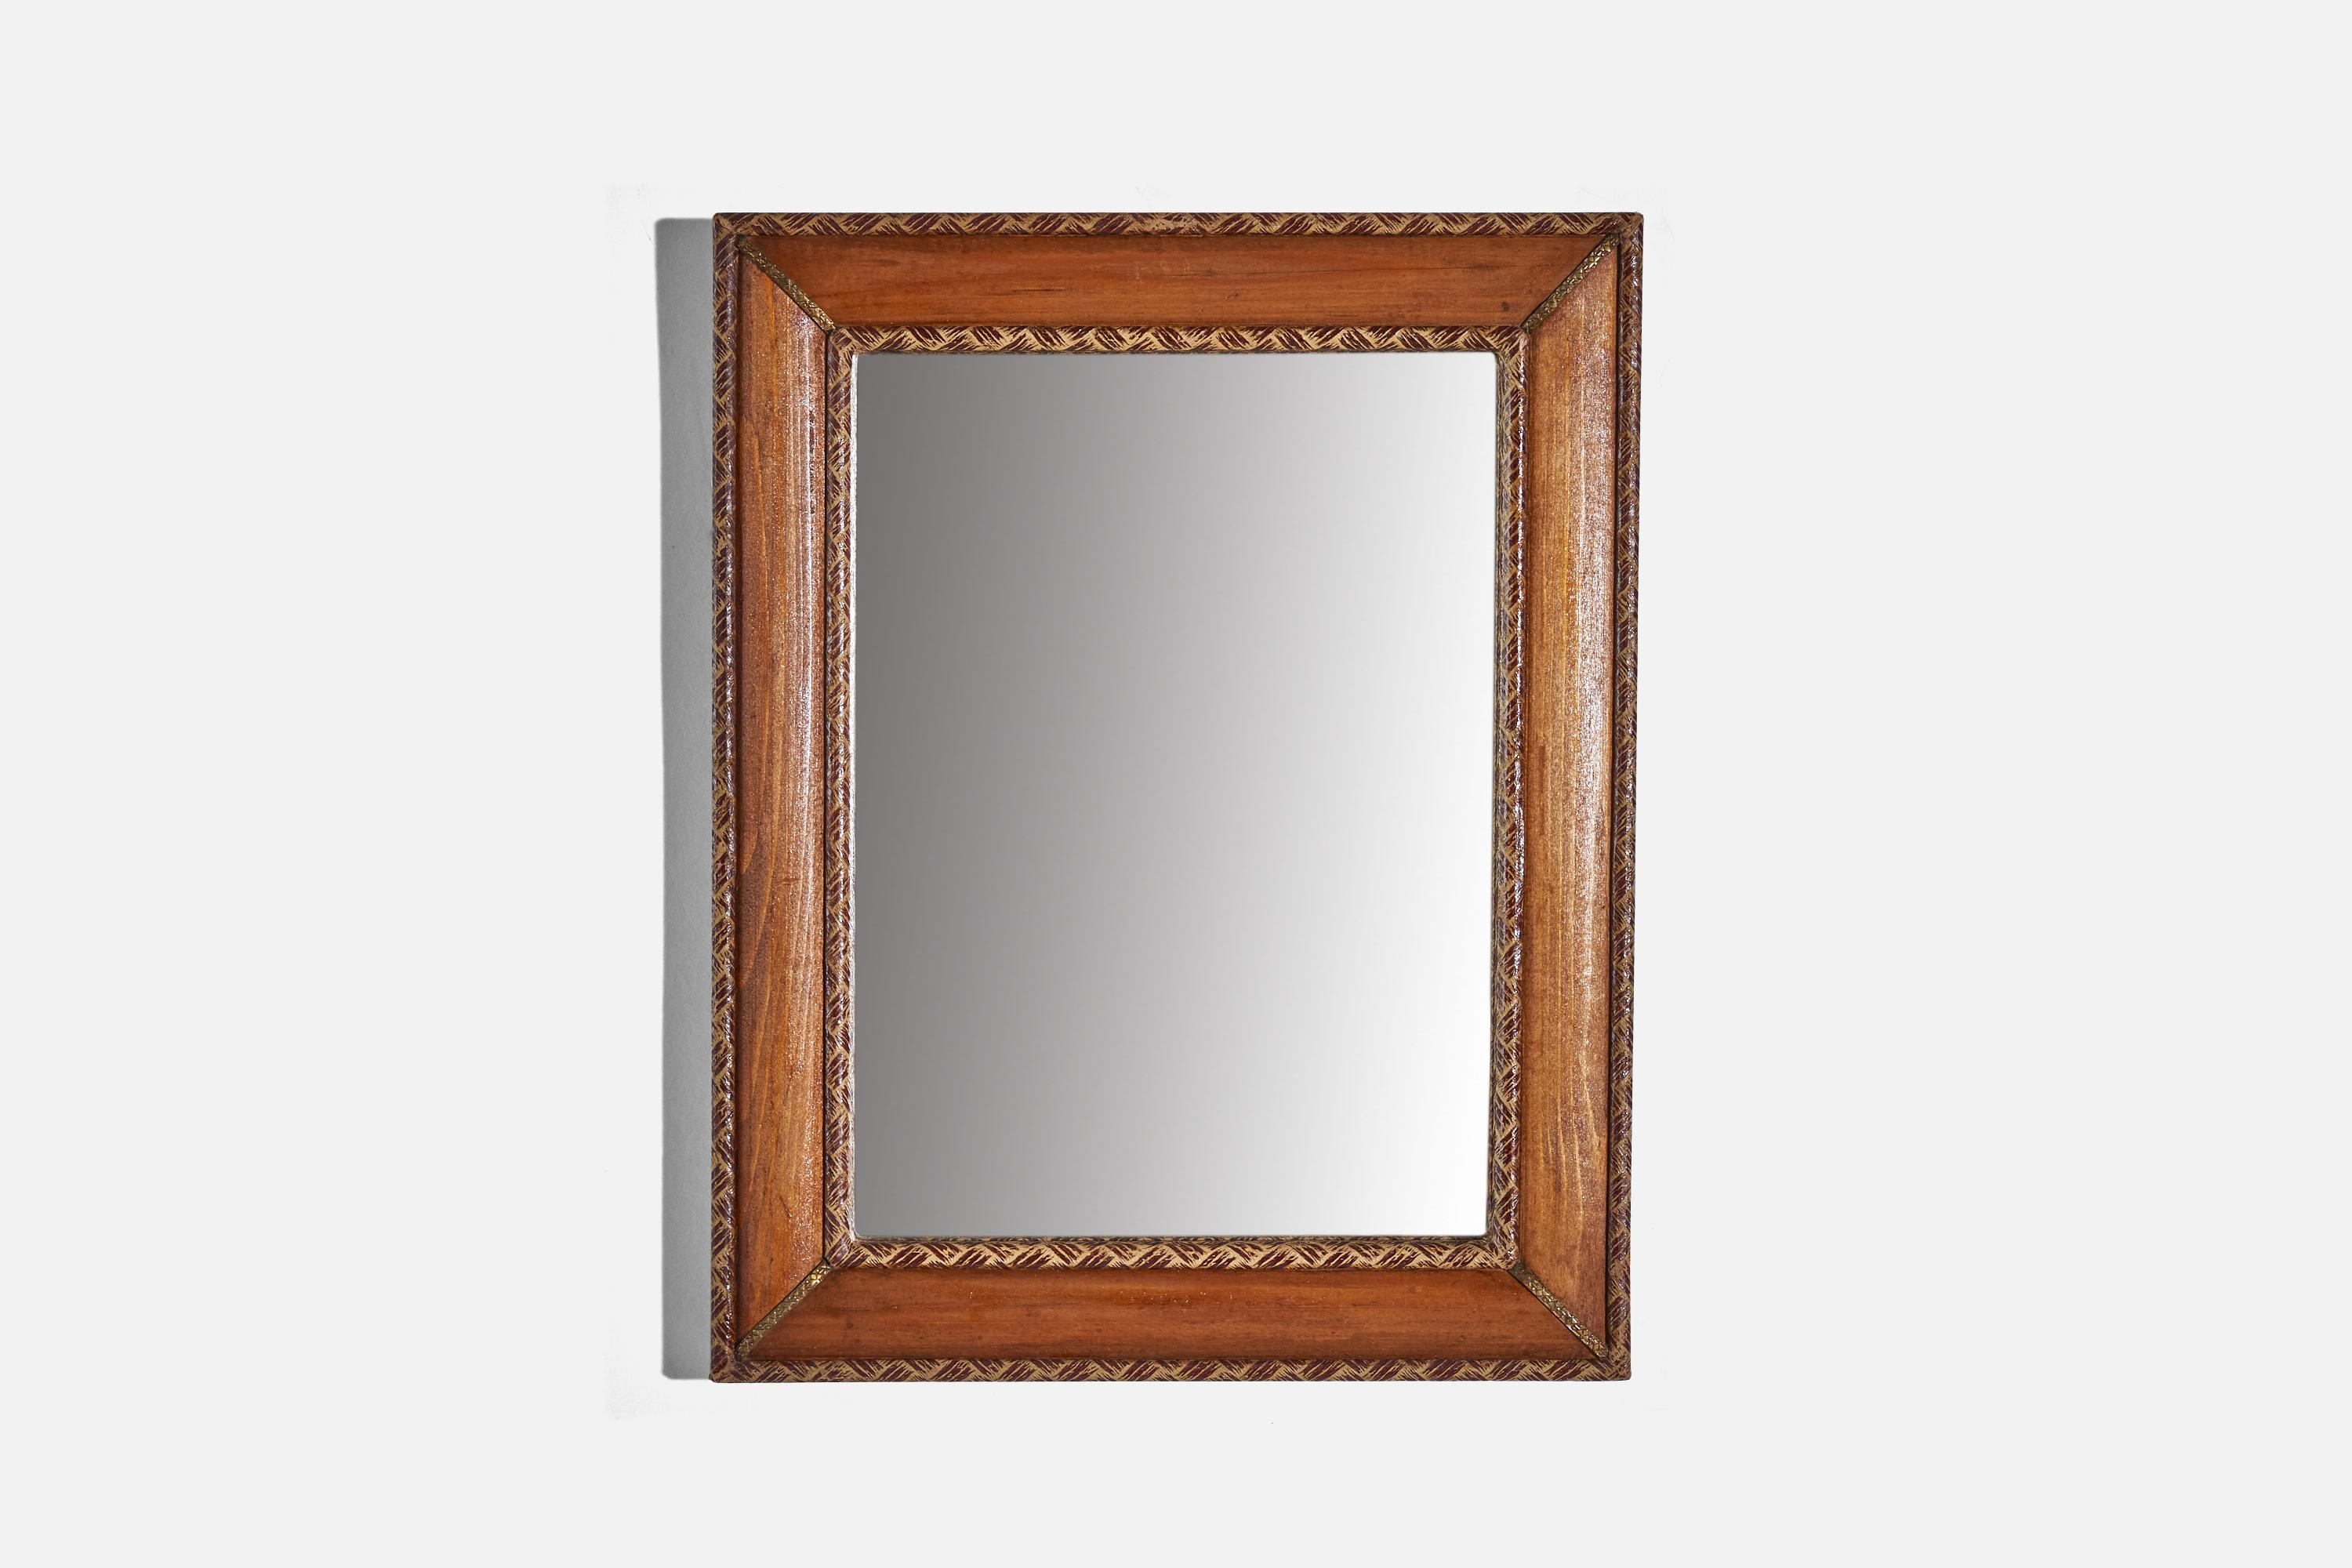 A wood, brass and leather wall mirror designed and produced in Italy, c. 1930s.
  